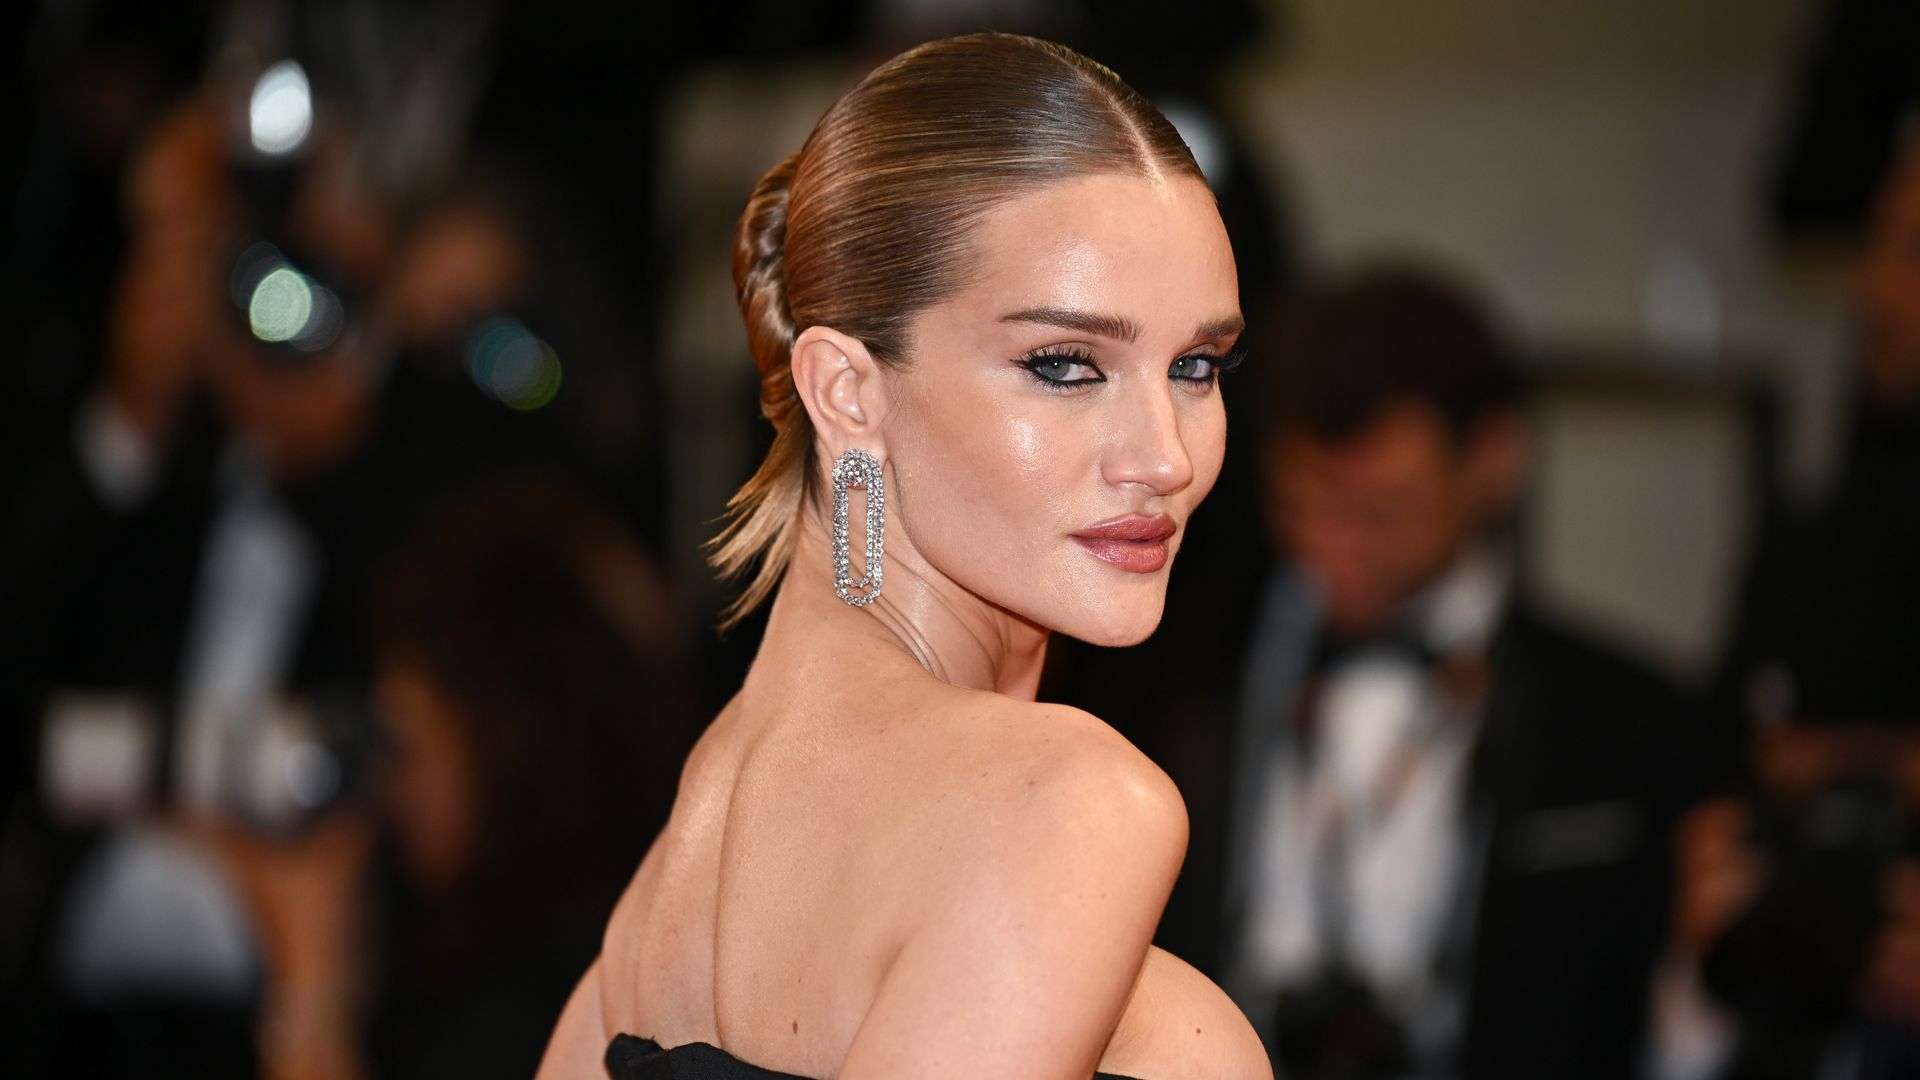 Rosie Huntington-Whiteley wearing Victoria Beckham strapless jumpsuit on the red carpet at Cannes